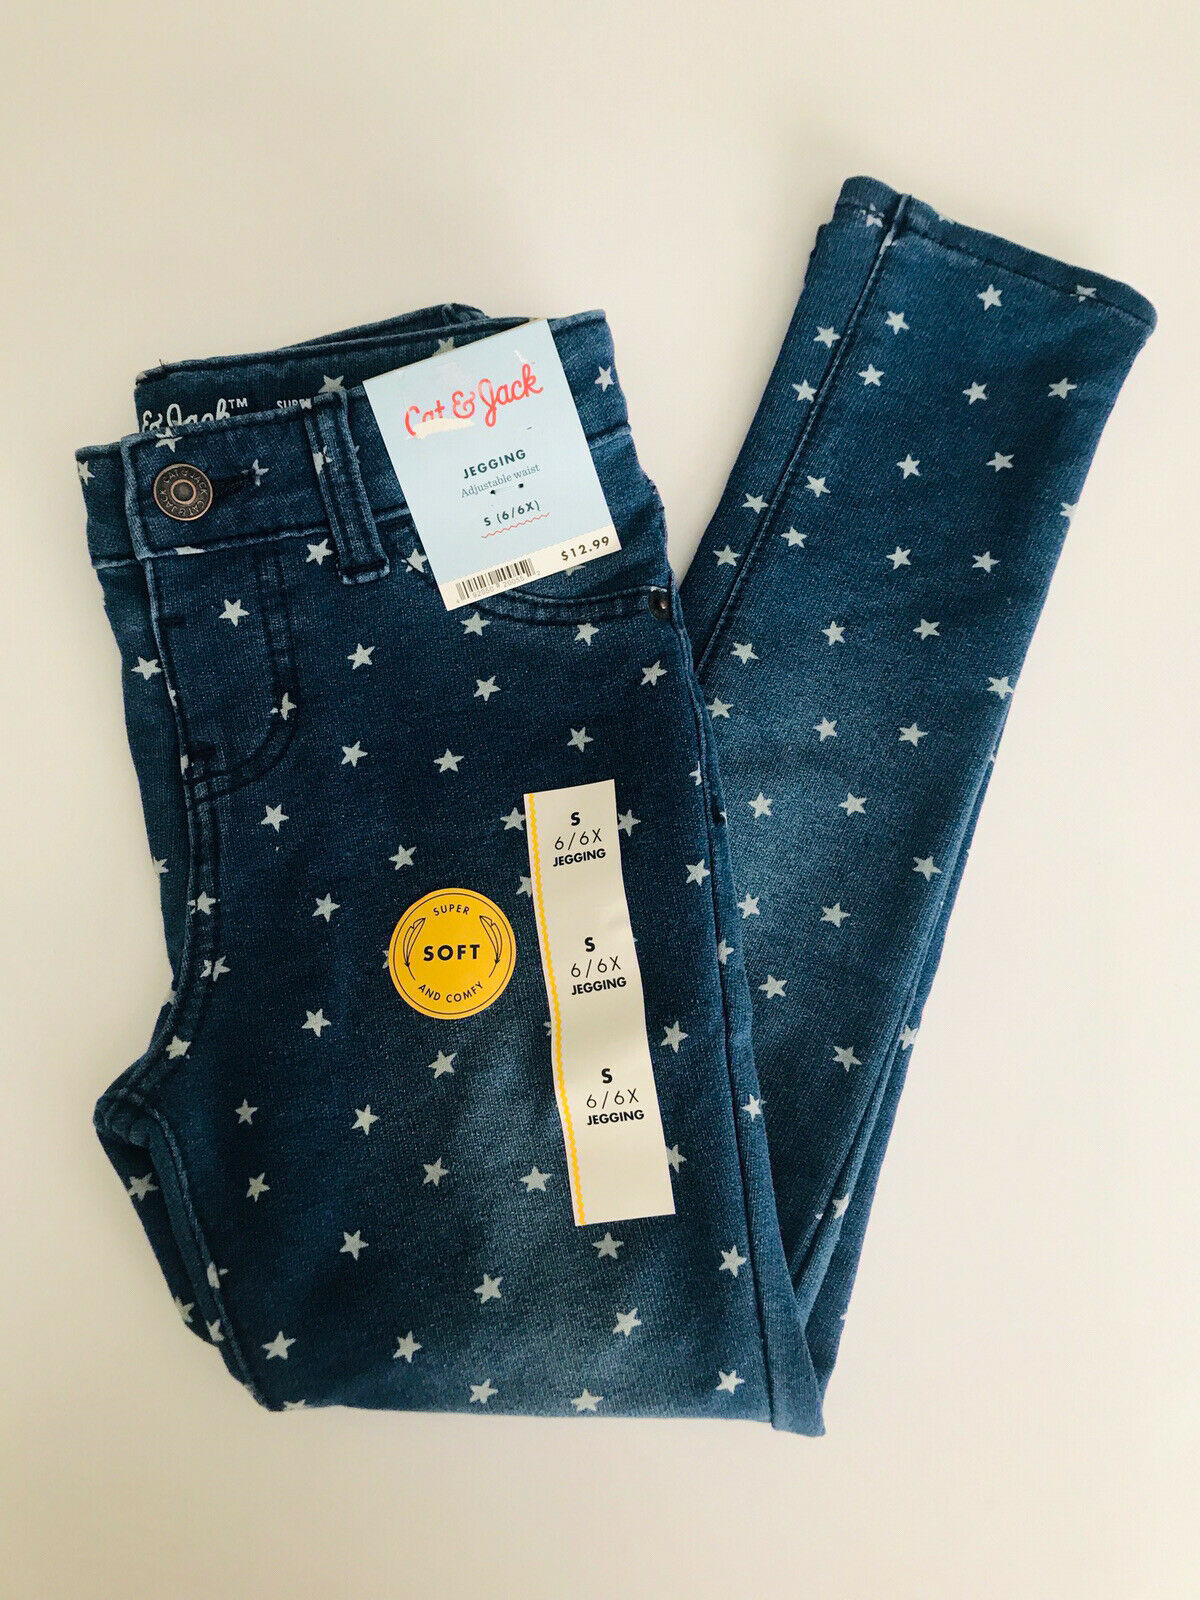 Cat & Jack Girls Jeggings Stretch Stars Gradient Soft & Comfy Size S (6/6x) Nwt!